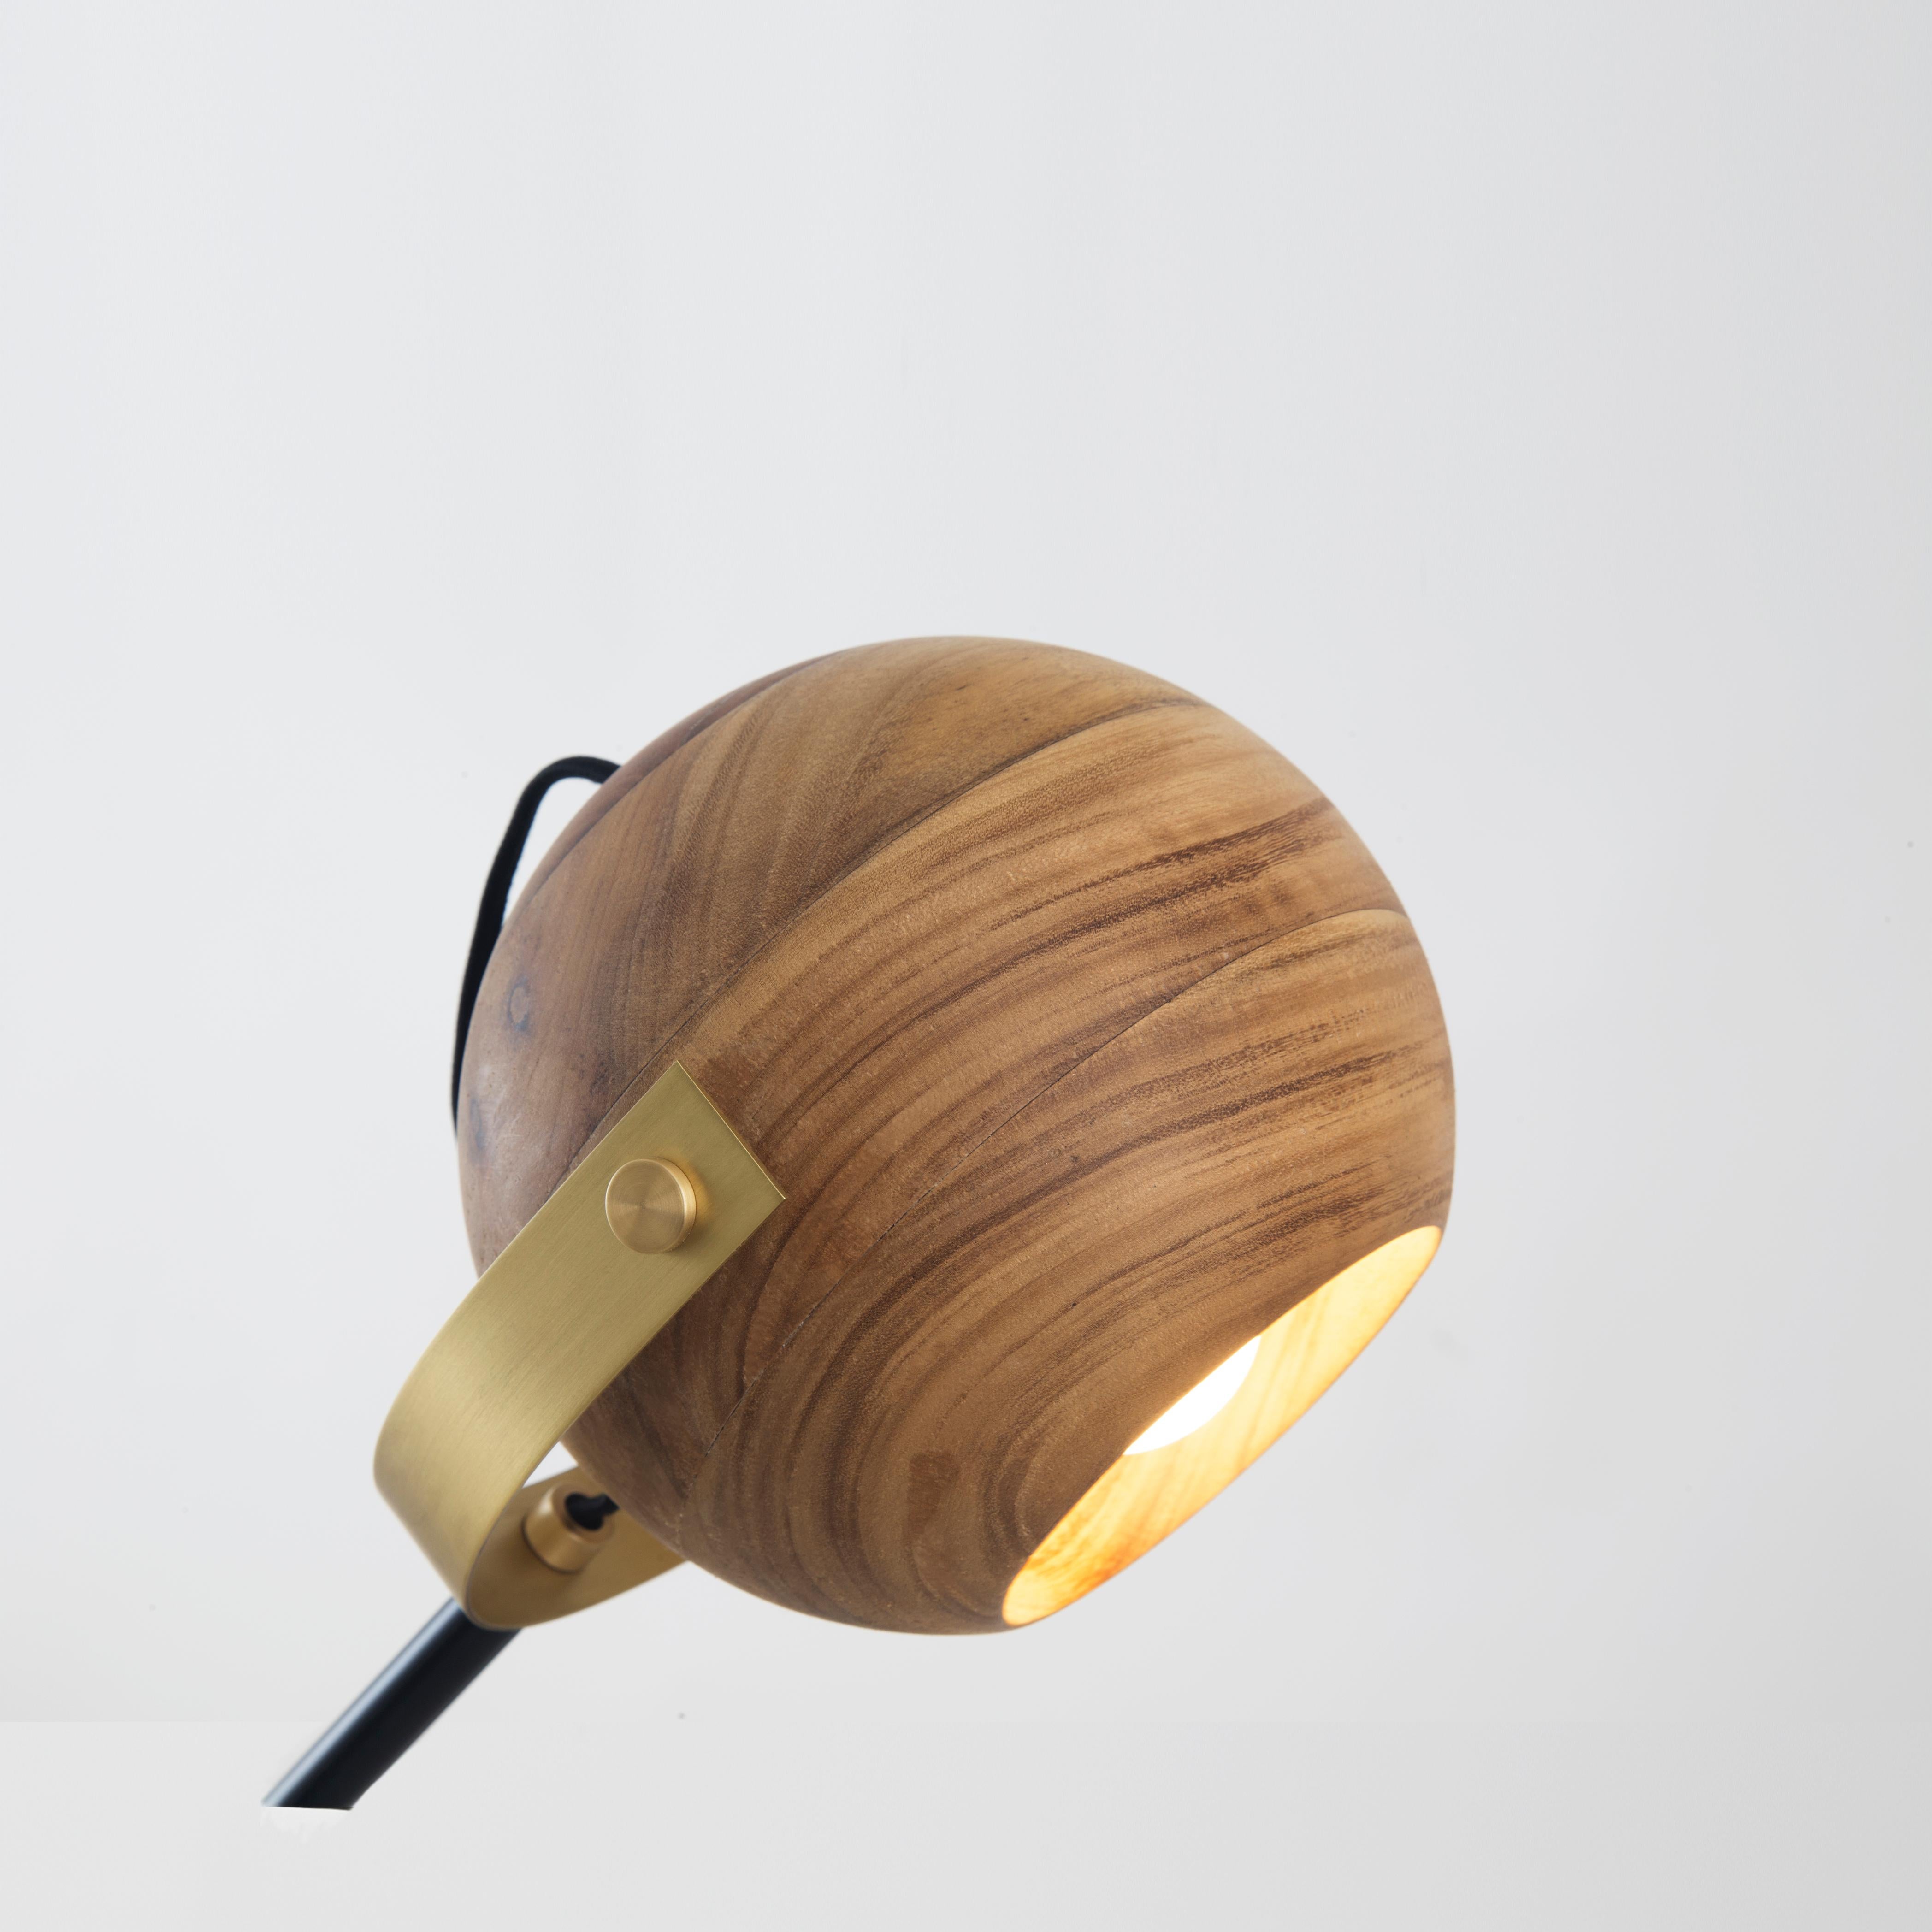 Inspired by the Brazilian Mid-century Modern style, this Articulable wood black and brass desk lamp, 3 axes smooth movement, was awarded at the A’Design Awards 2019.
With its geometrical rational form, this lamp expresses the beauty of Brazilian raw